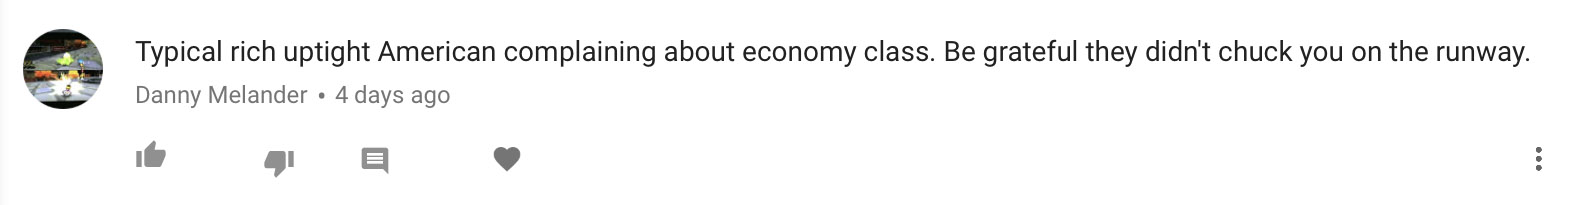 SANspotter youtube comments Emirates A380 economy class